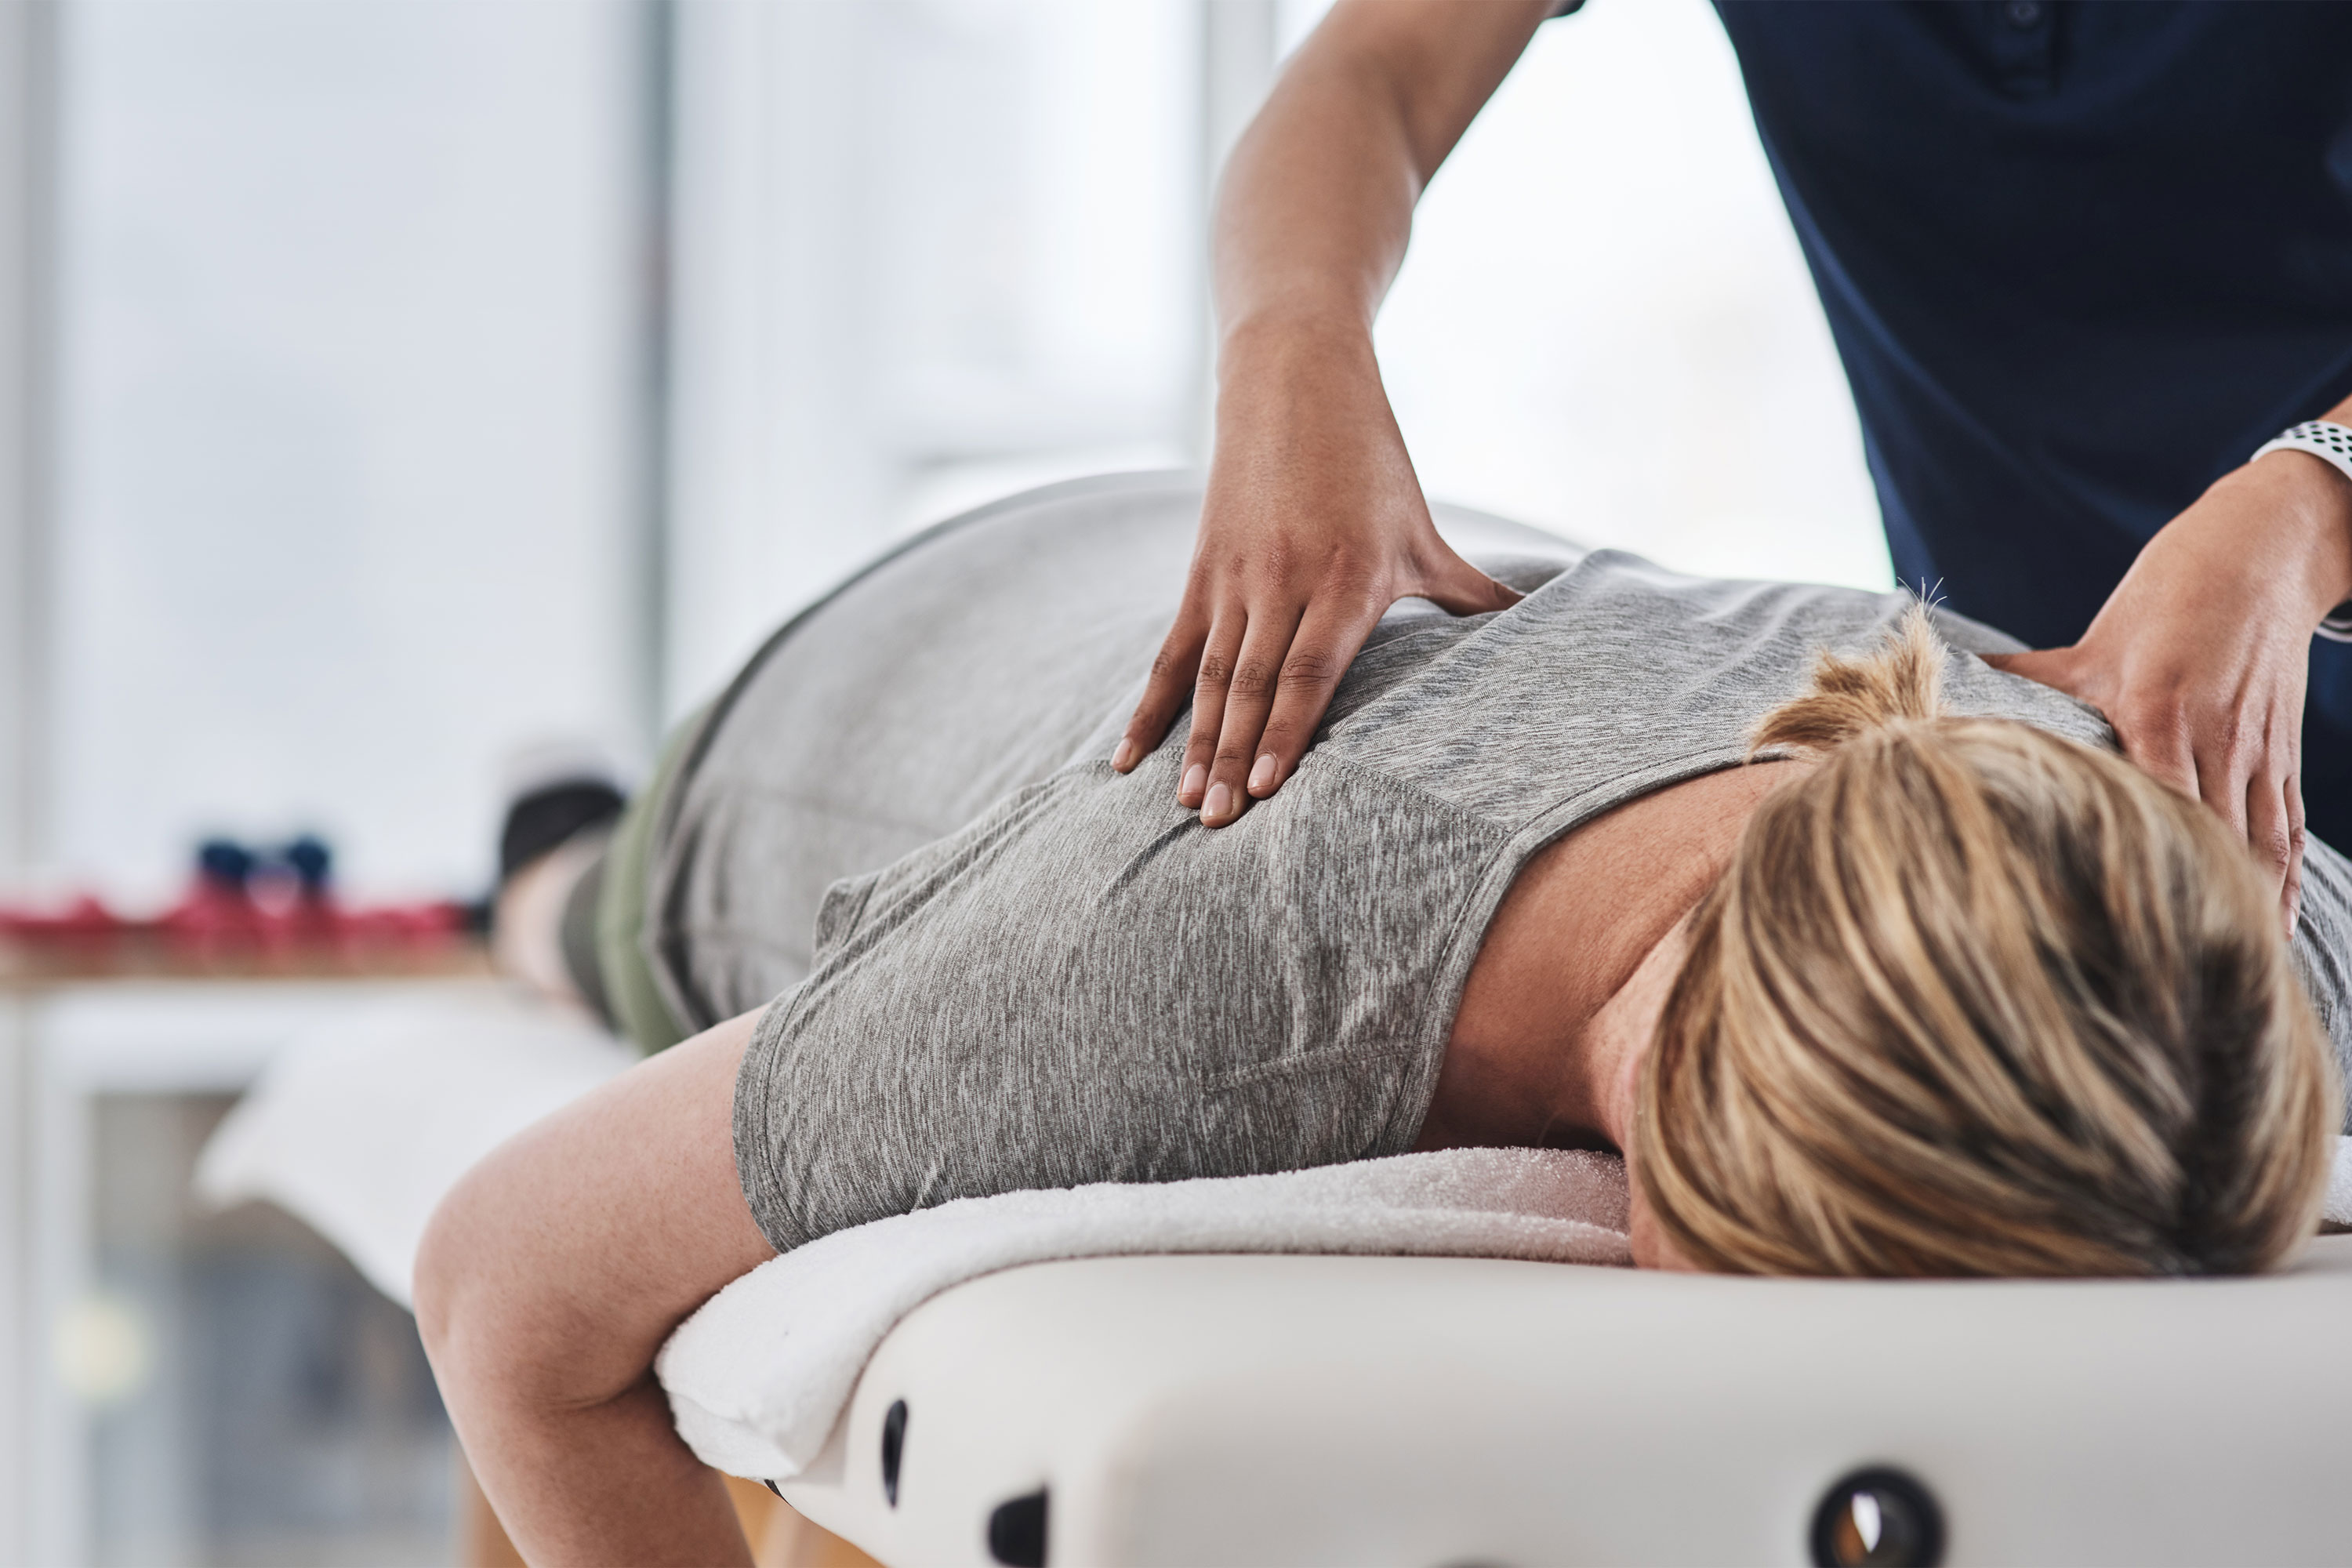 https://images.ctfassets.net/yixw23k2v6vo/7L6T64AThO7RziIdRHBZb3/7dae5696fa7b39b7dfce8e15fb9fec38/back-massage-during-physical-therapy-GettyImages-1185439130-3000x2000.jpg